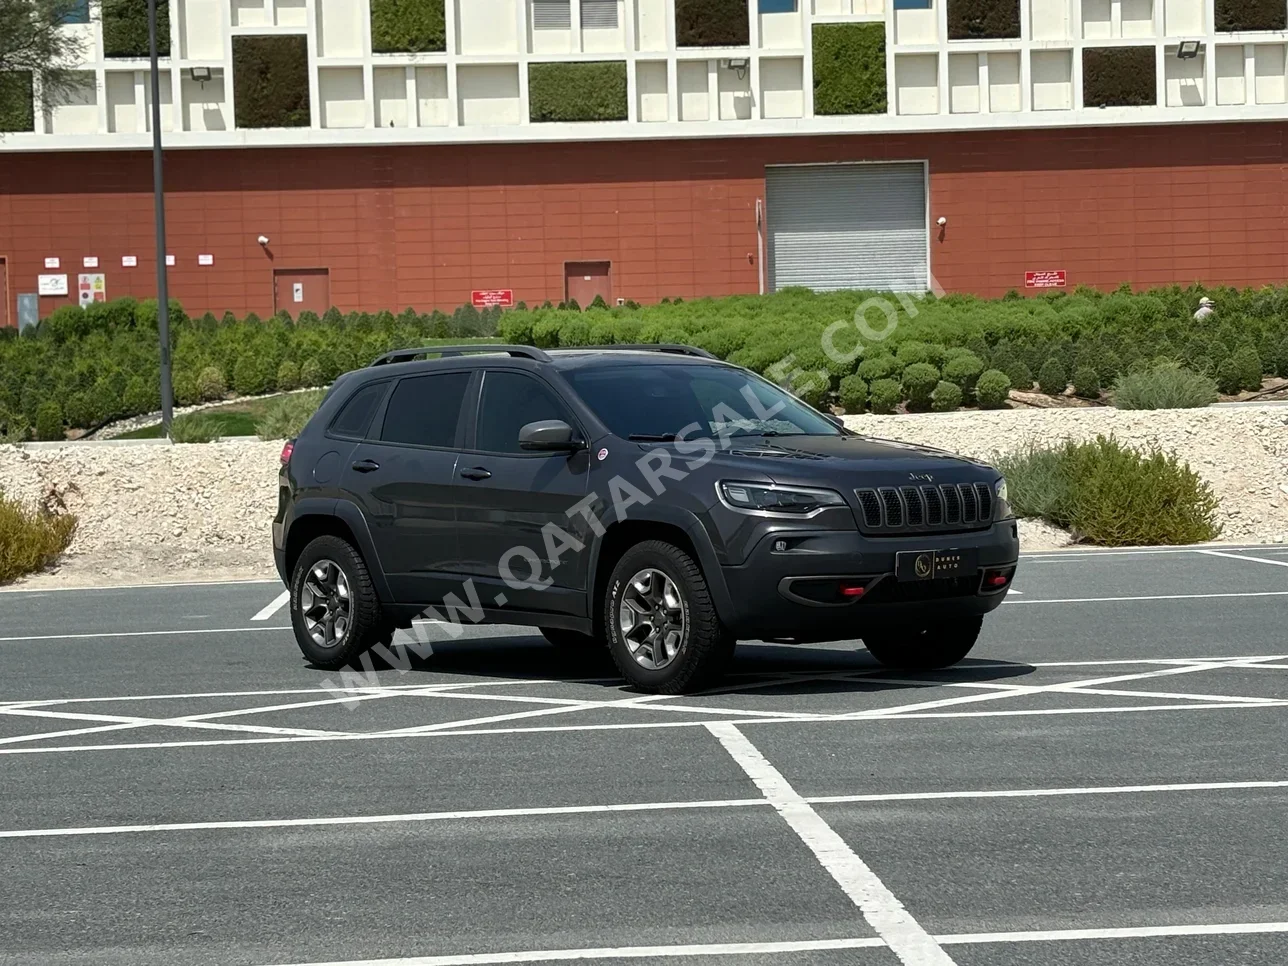 Jeep  Cherokee  TrailHawk  2019  Automatic  60,000 Km  6 Cylinder  Four Wheel Drive (4WD)  SUV  Gray